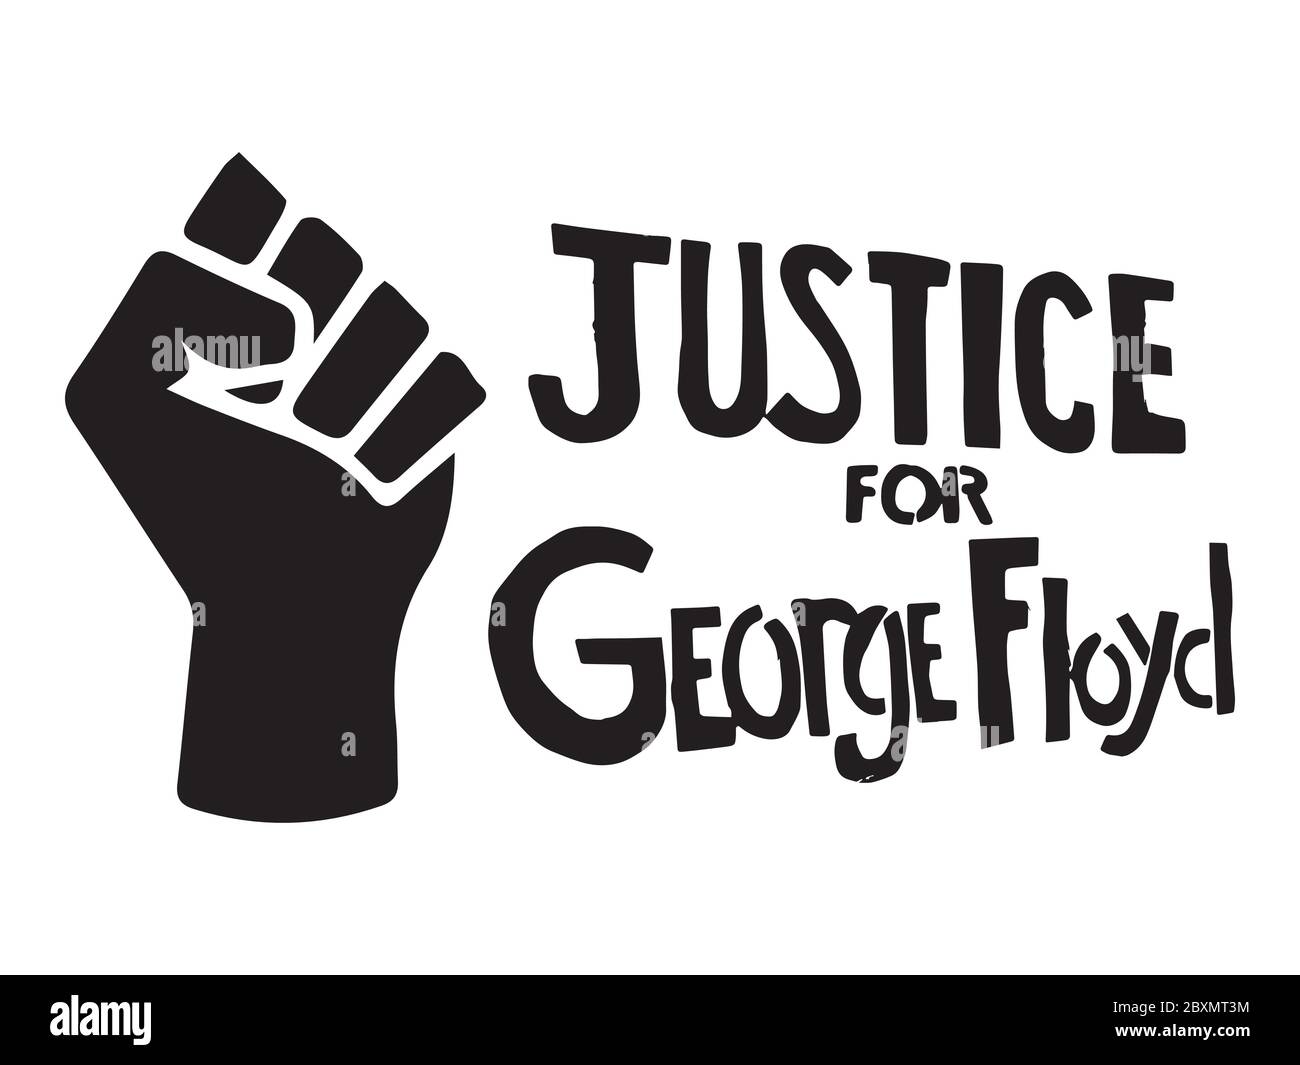 Justice for George Floyd with Fist. Pictogram Illustration Depicting Justice for Floyd Text with Fist. Black and white EPS Vector File. Stock Vector